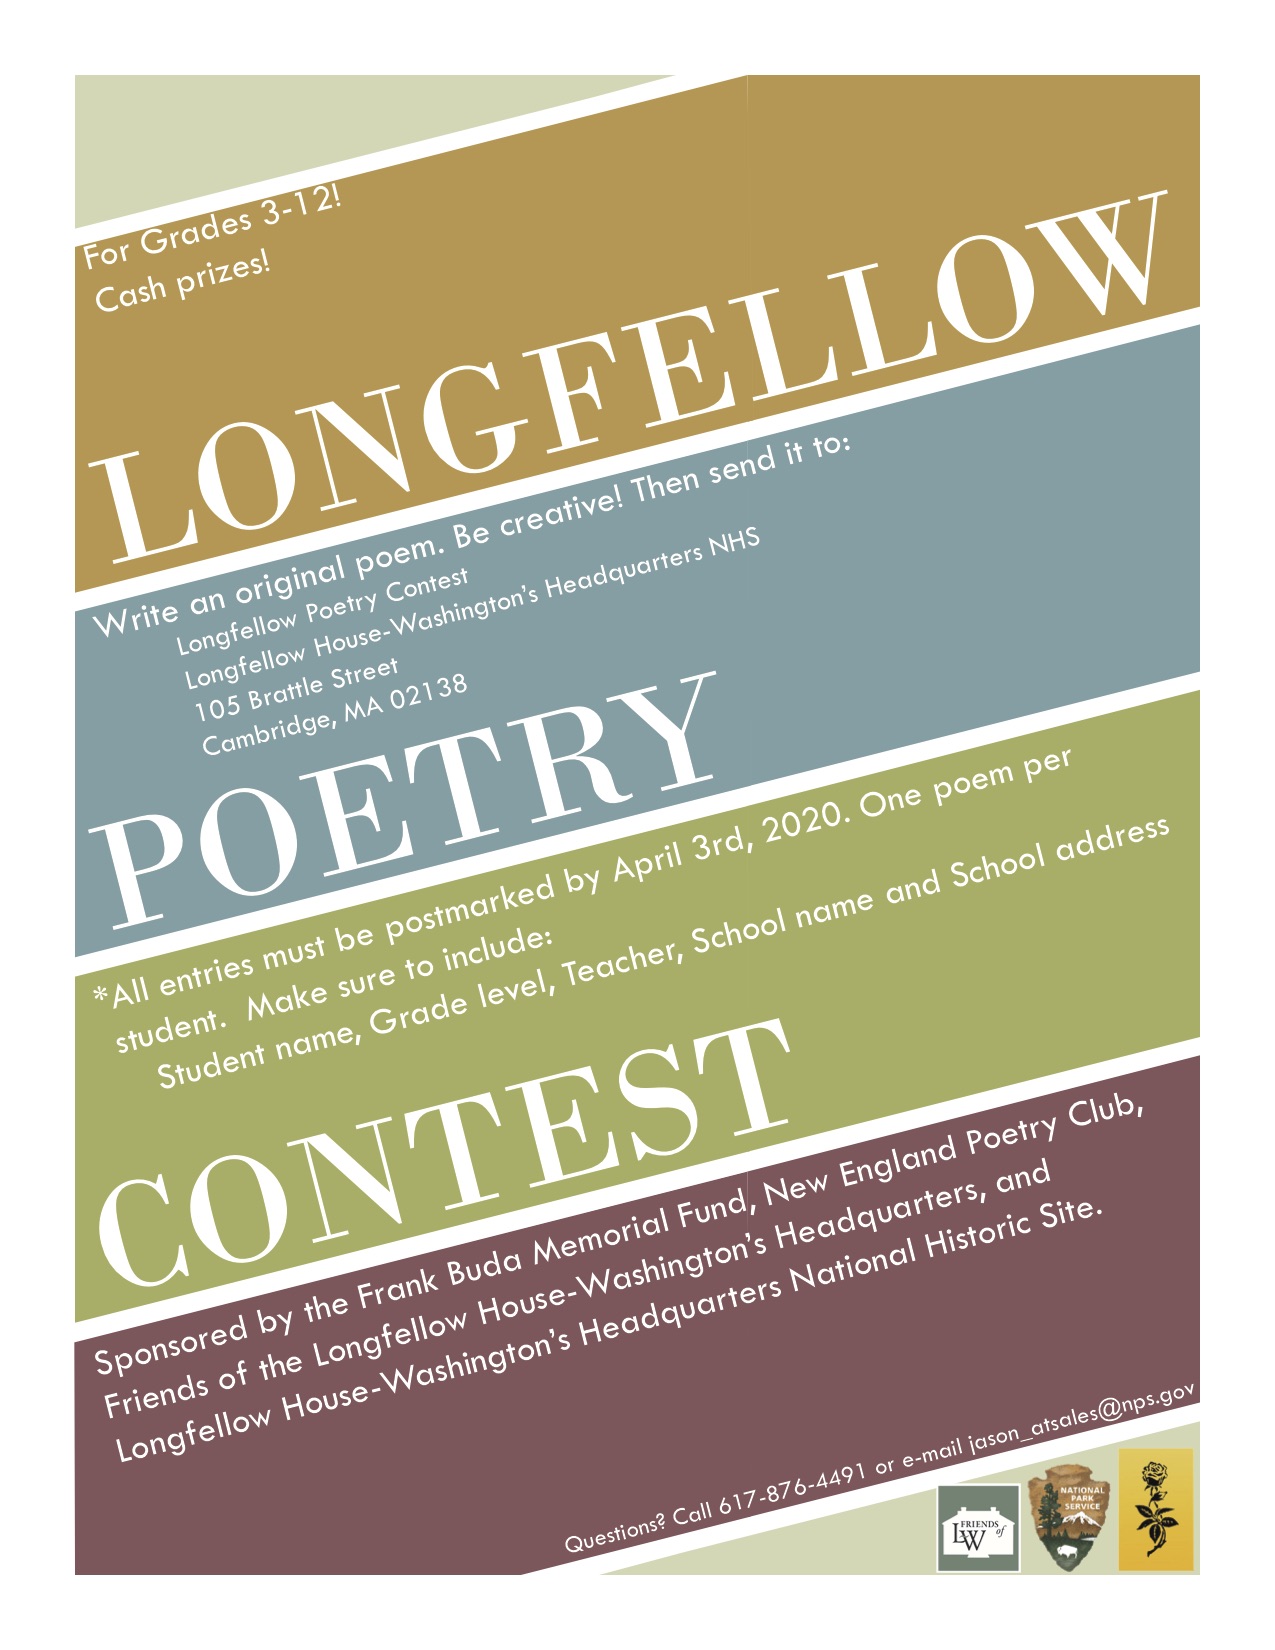 Student Poetry Contests! New England Poetry Club